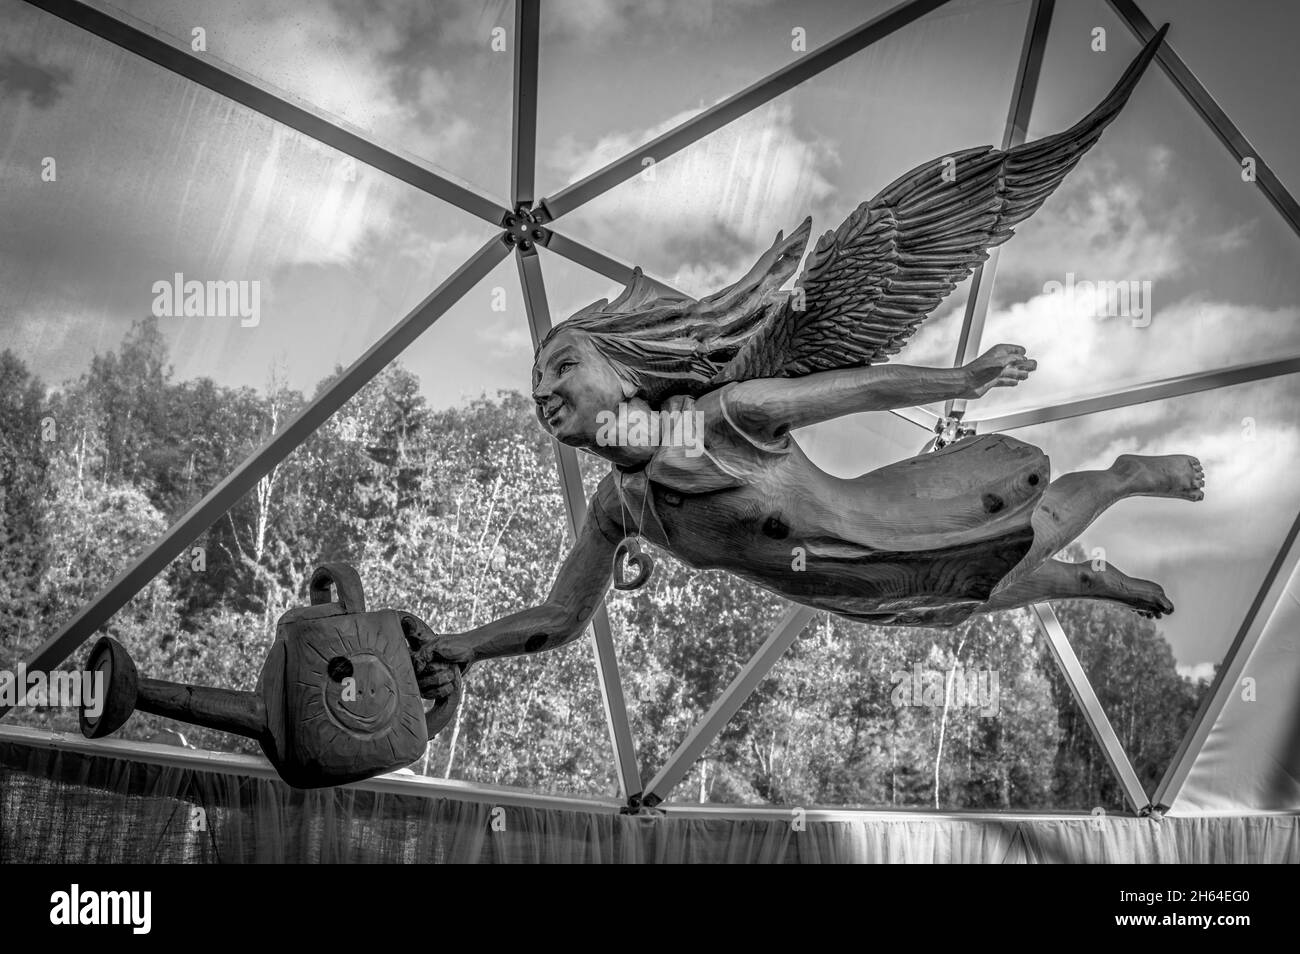 Wooden sculpture of a flying angel in Ruskeala Mountain Park. Karelia, Russia. Black and white. Stock Photo